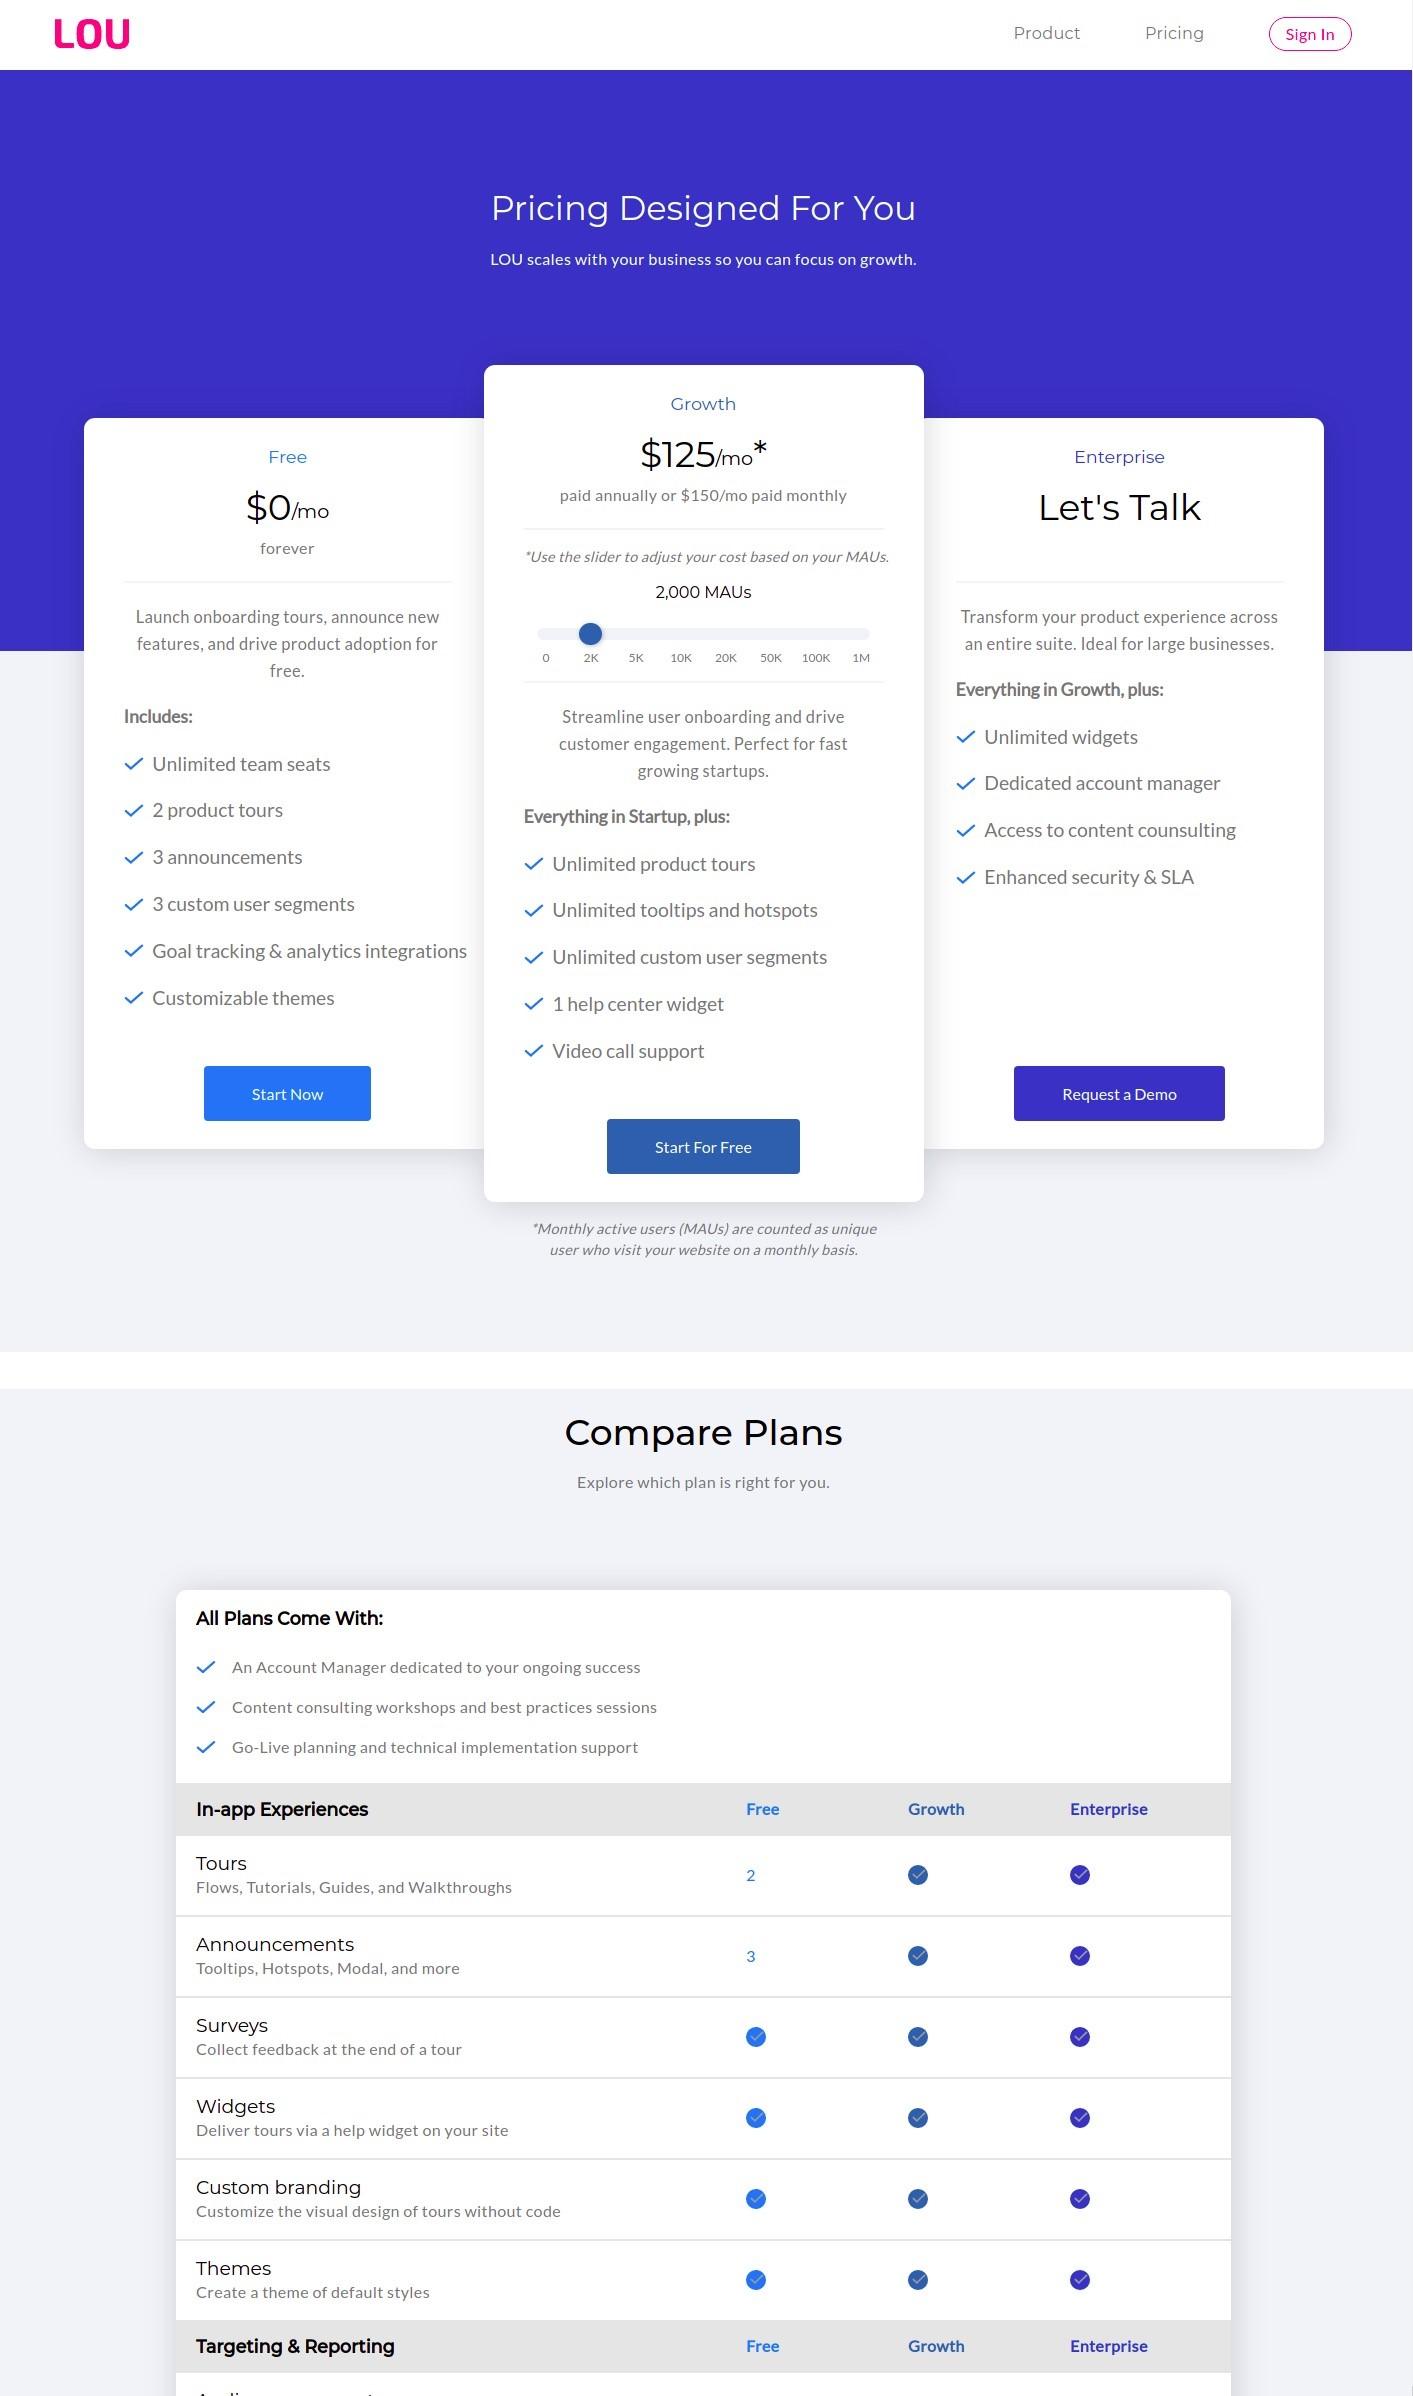 Updated Pricing Page.